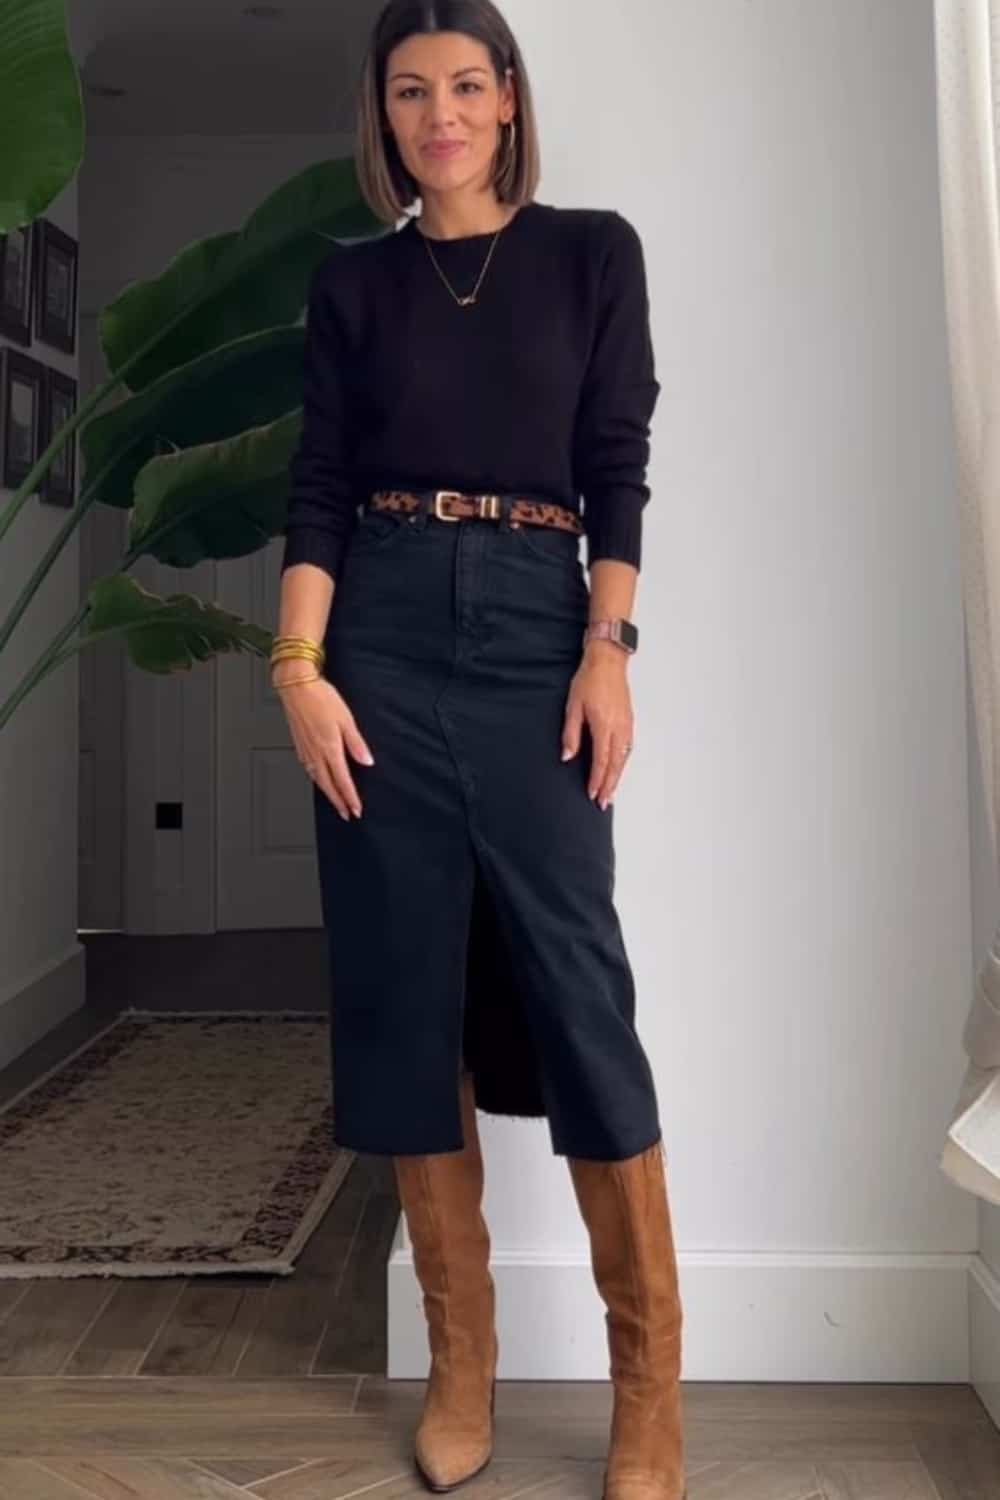 Belt with sweater skirt outfit